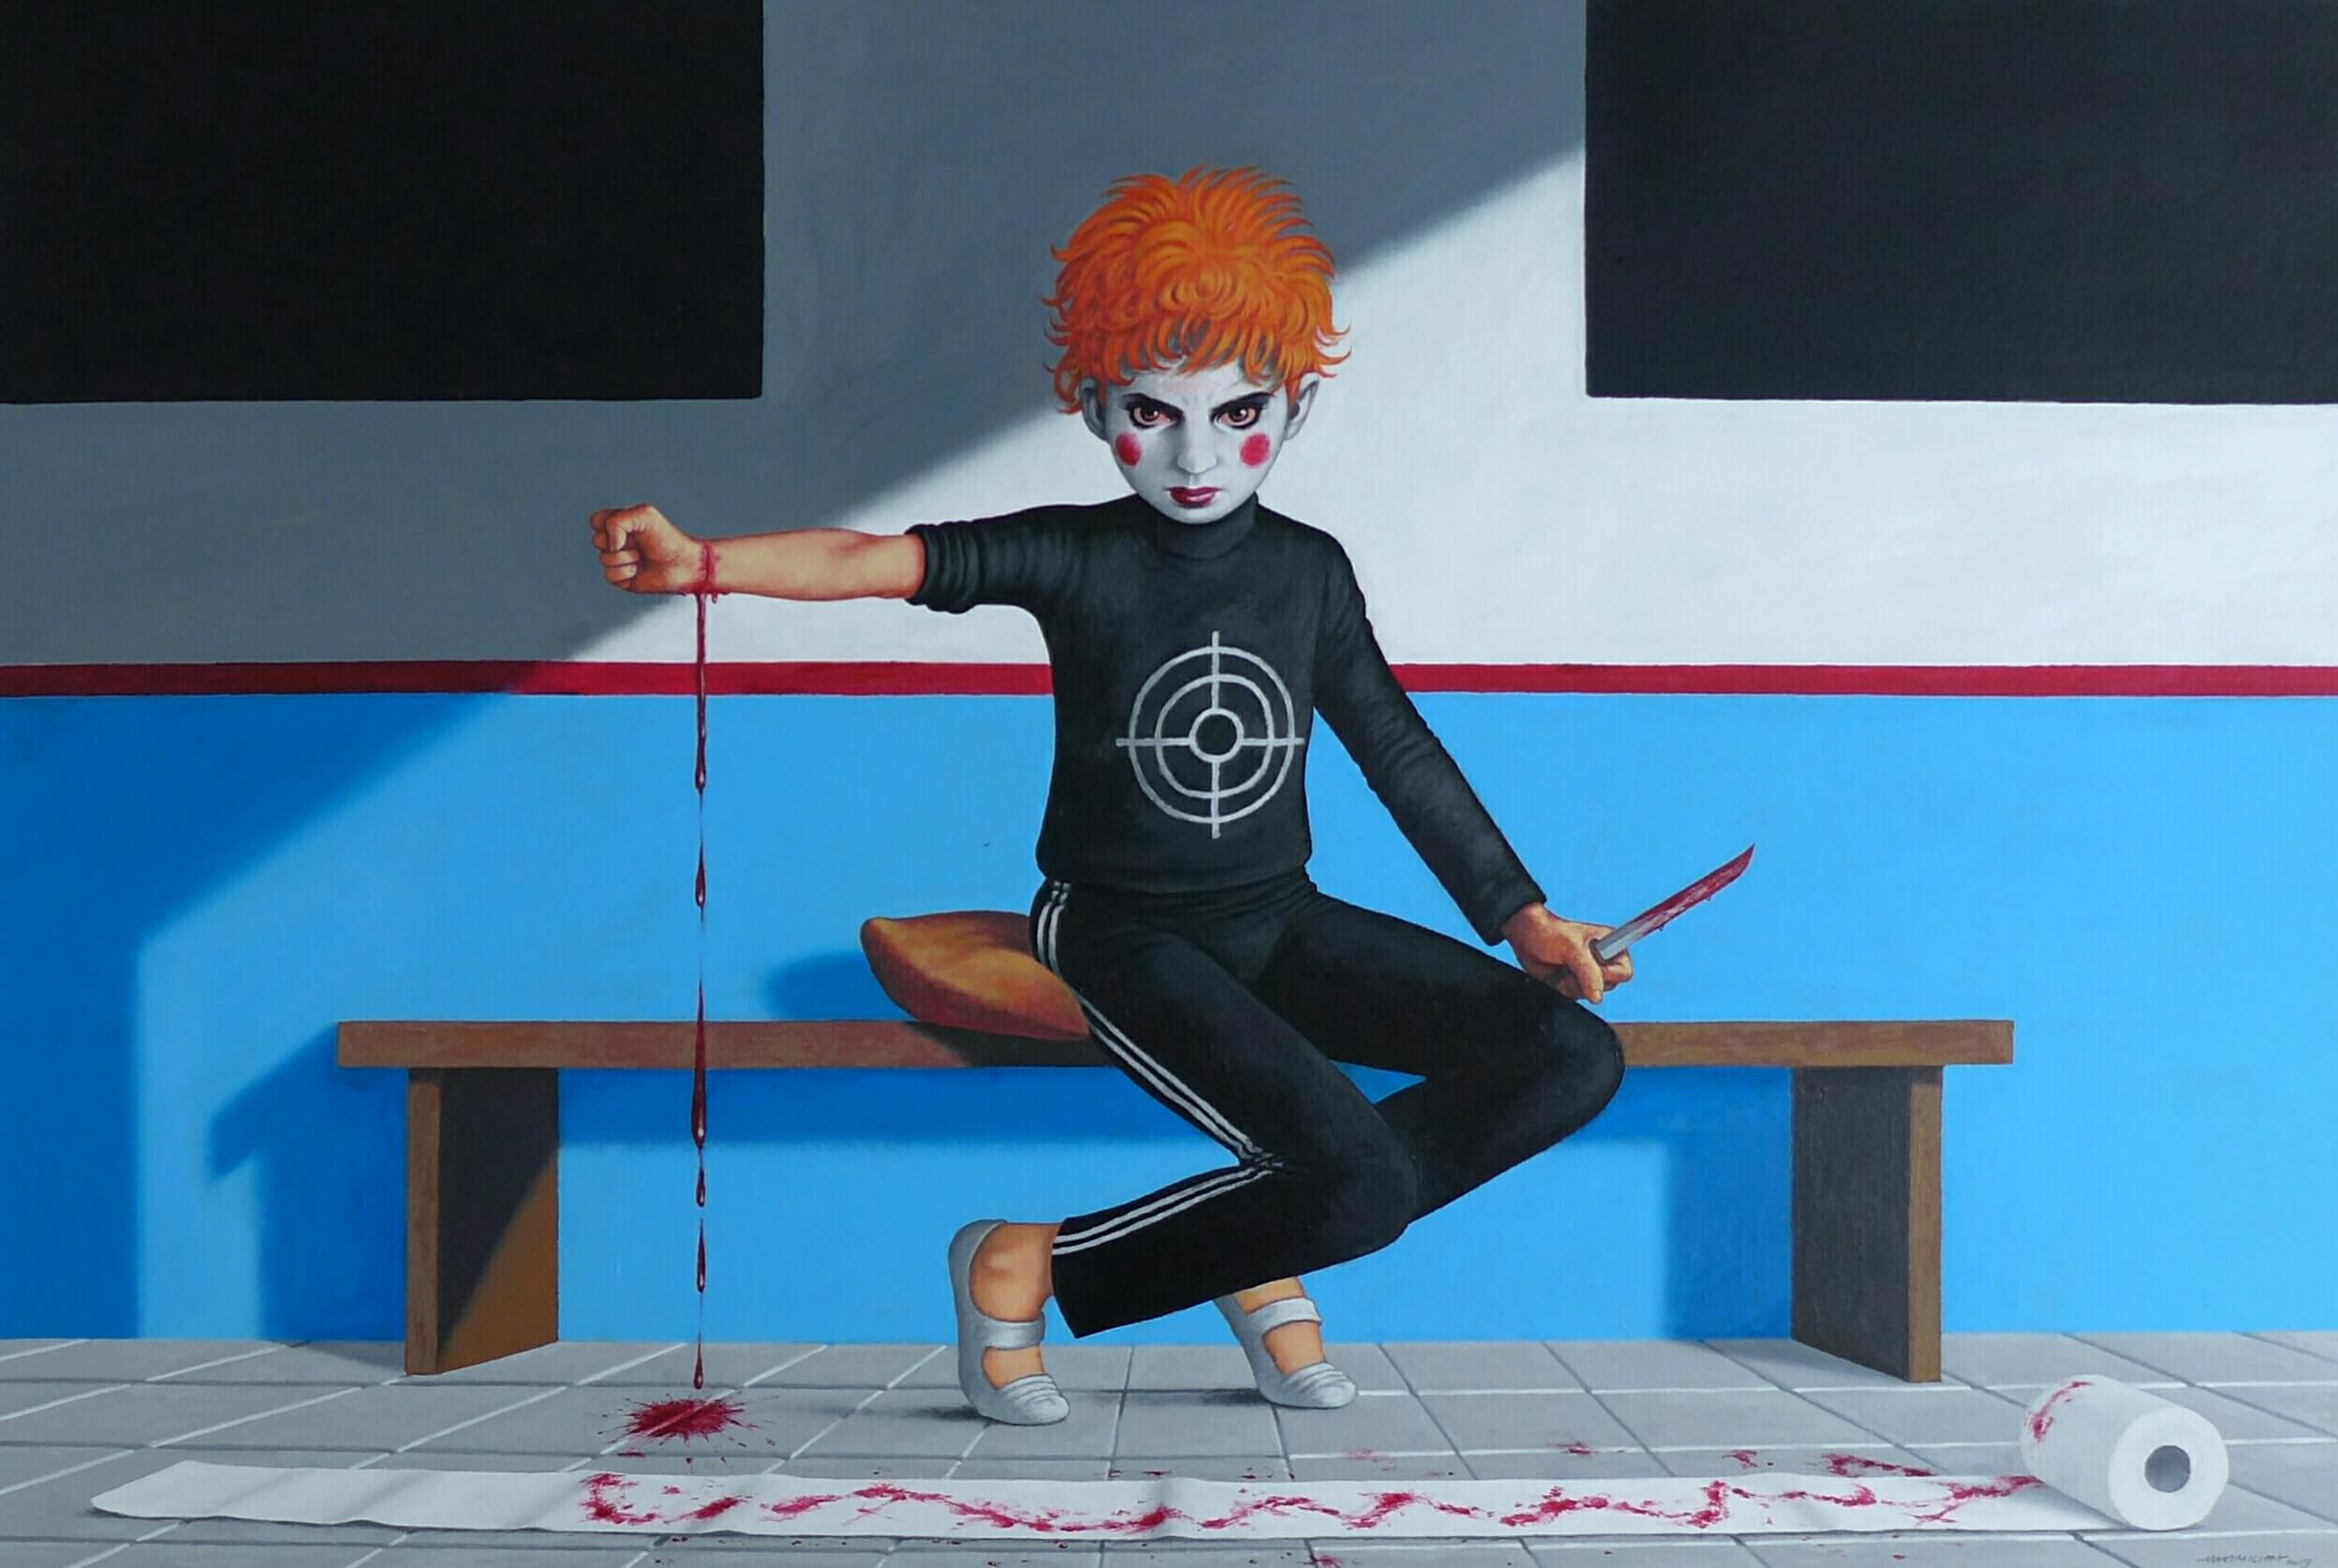 Massimiliano Esposito - Paintings the south west collective of photography boy dressed as clown cutting his own wrists